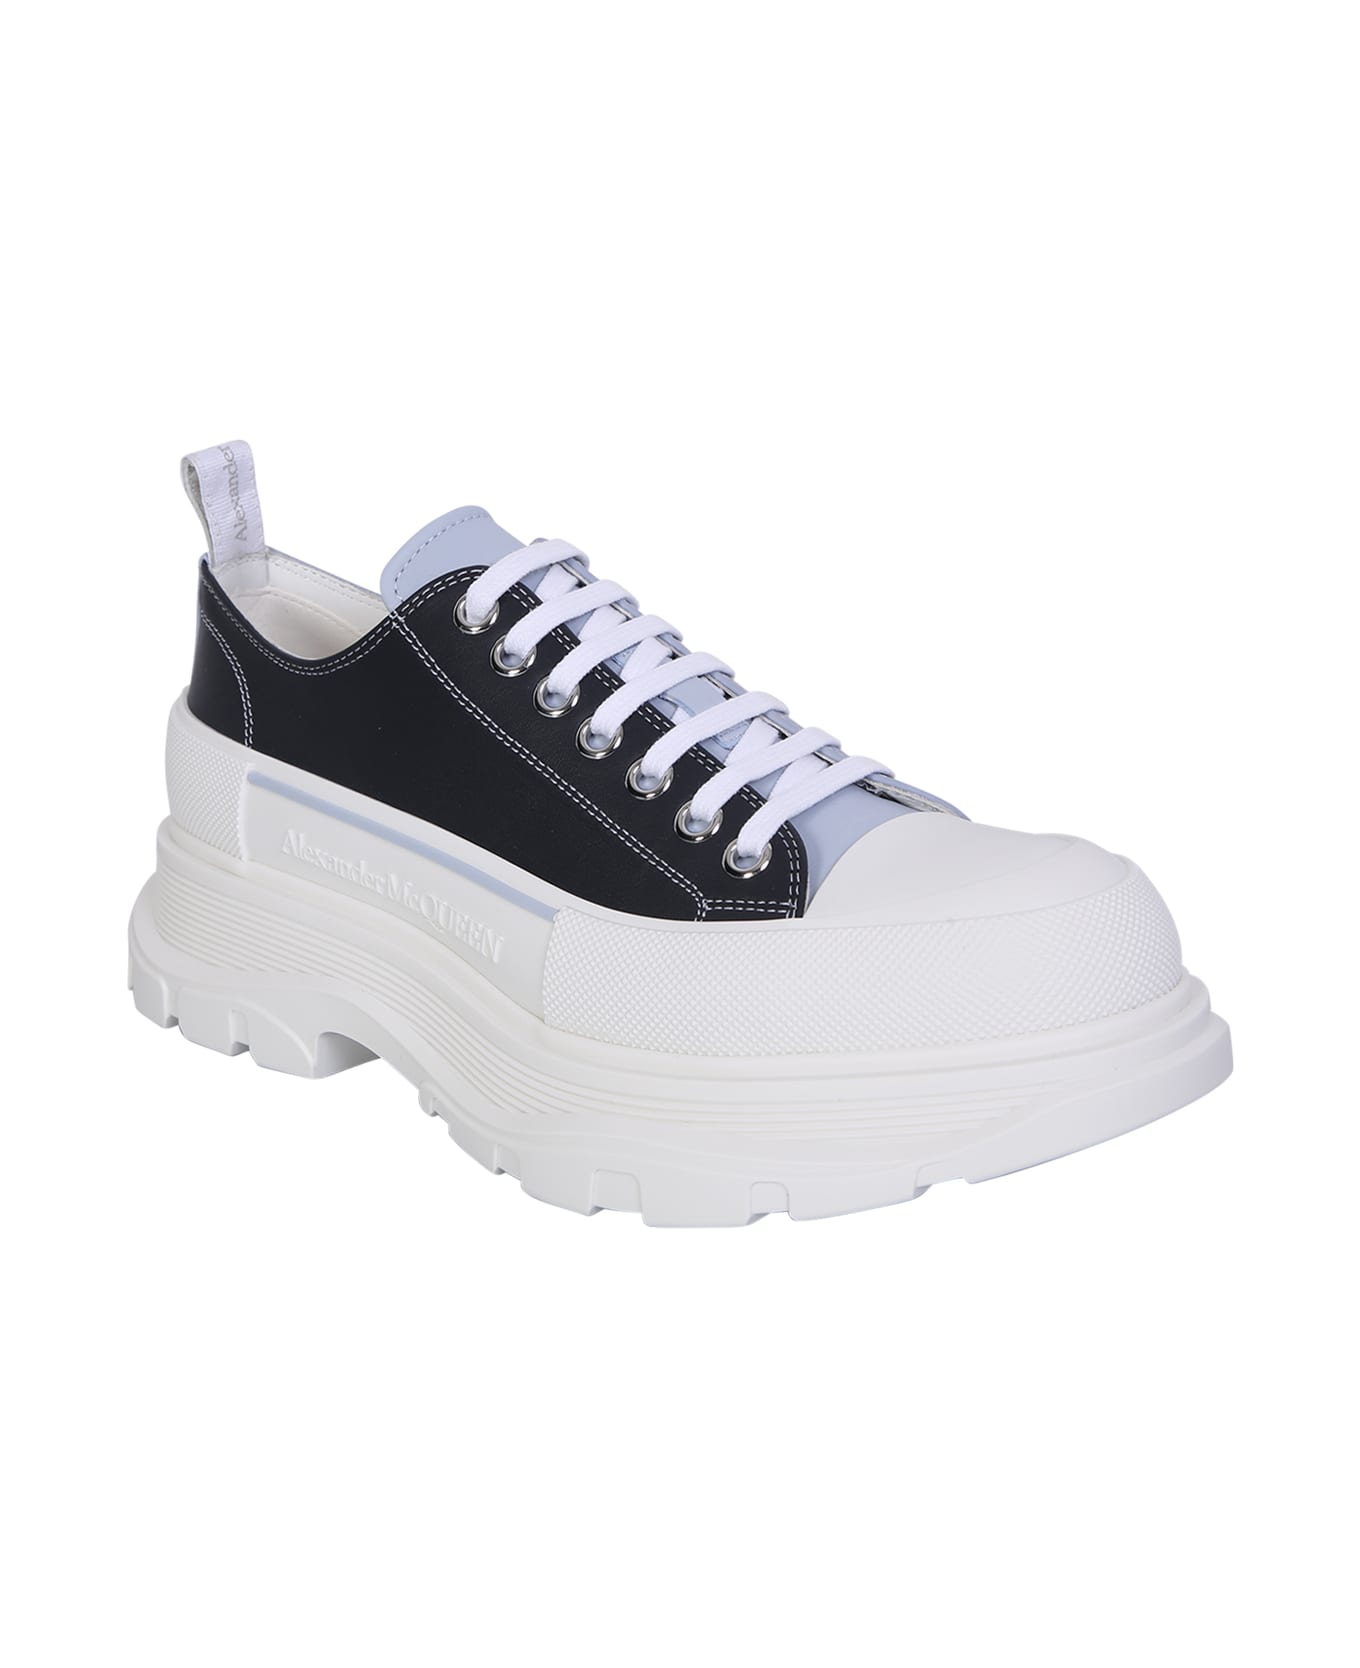 Alexander McQueen Tread Slick Round-toe Lace-up Sneakers - Blue スニーカー